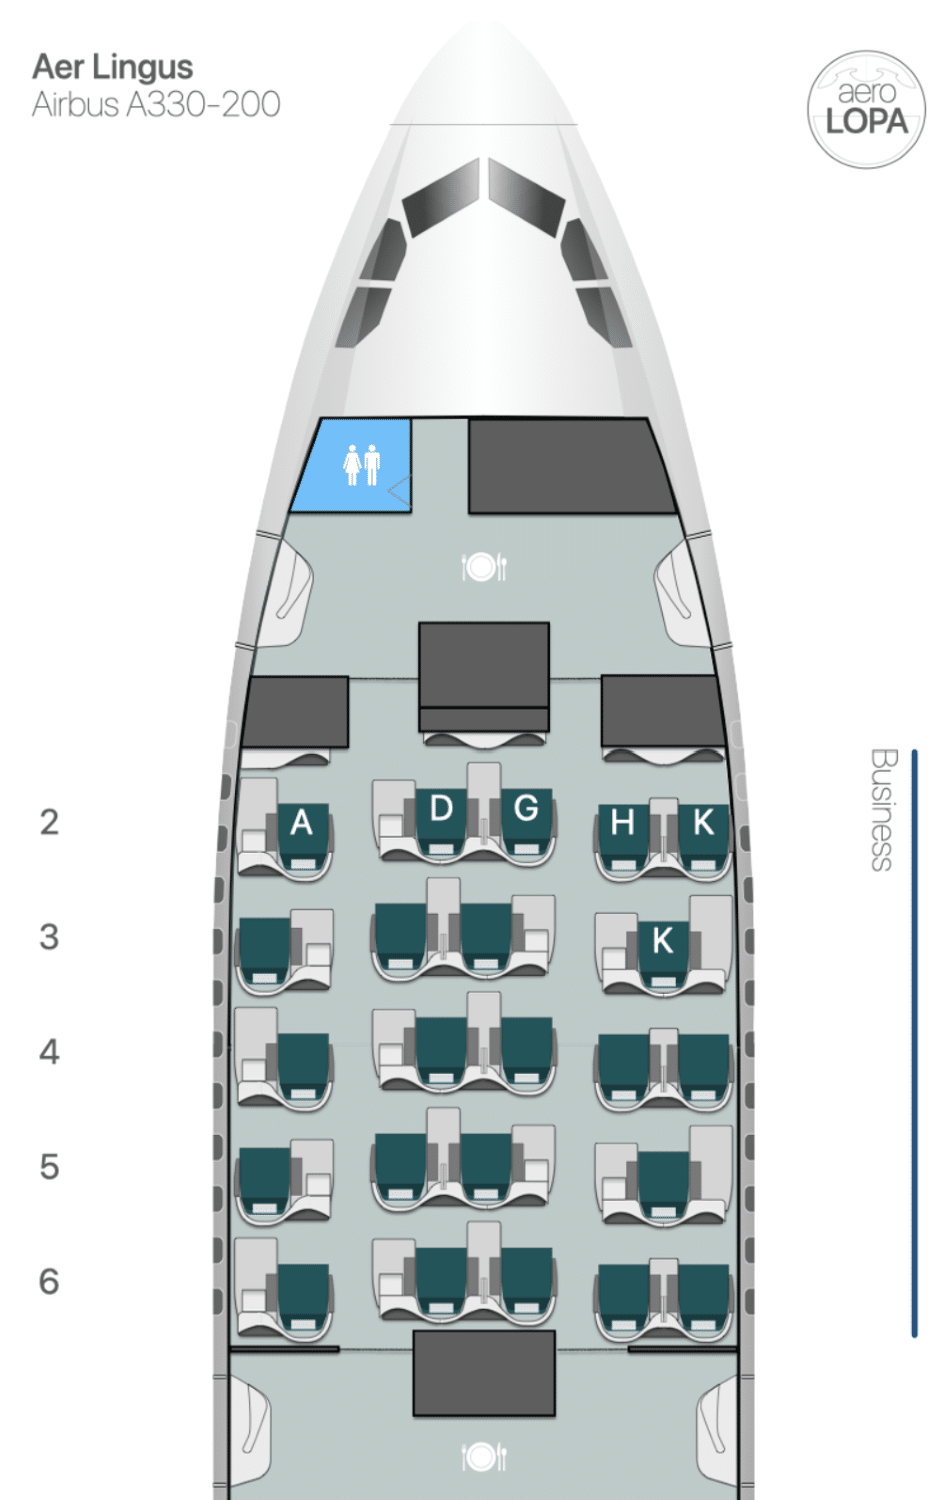 Cabin arrangement for Aer Lingus business class on the Airbus A330-200, courtesy of Aerolopa.